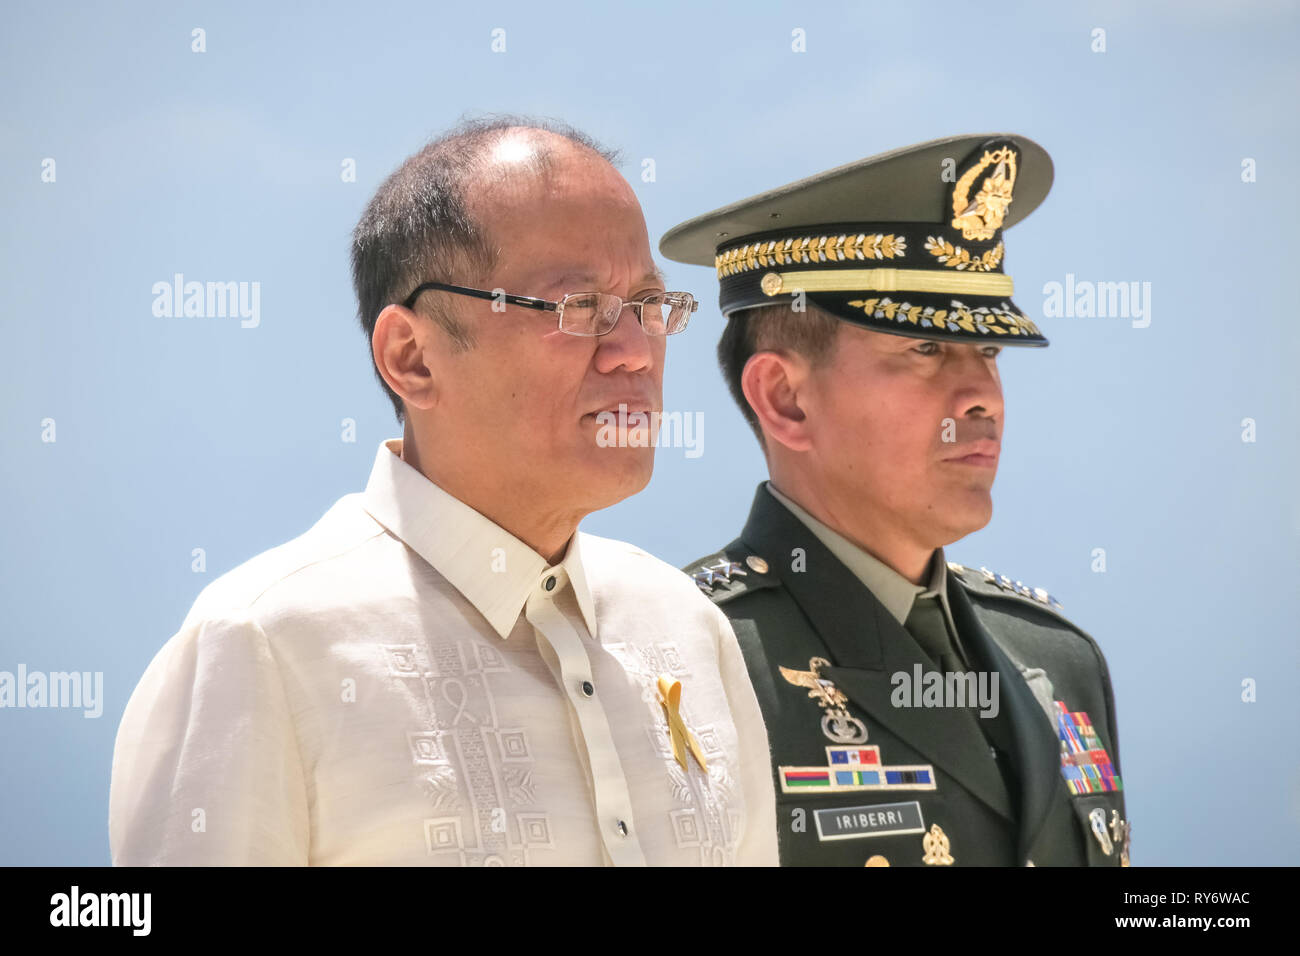 Benigno Aquino III, the 15th President of the Philippines, at memorial commemorating the fall of Bataan - Mount Samat, Philippines Stock Photo